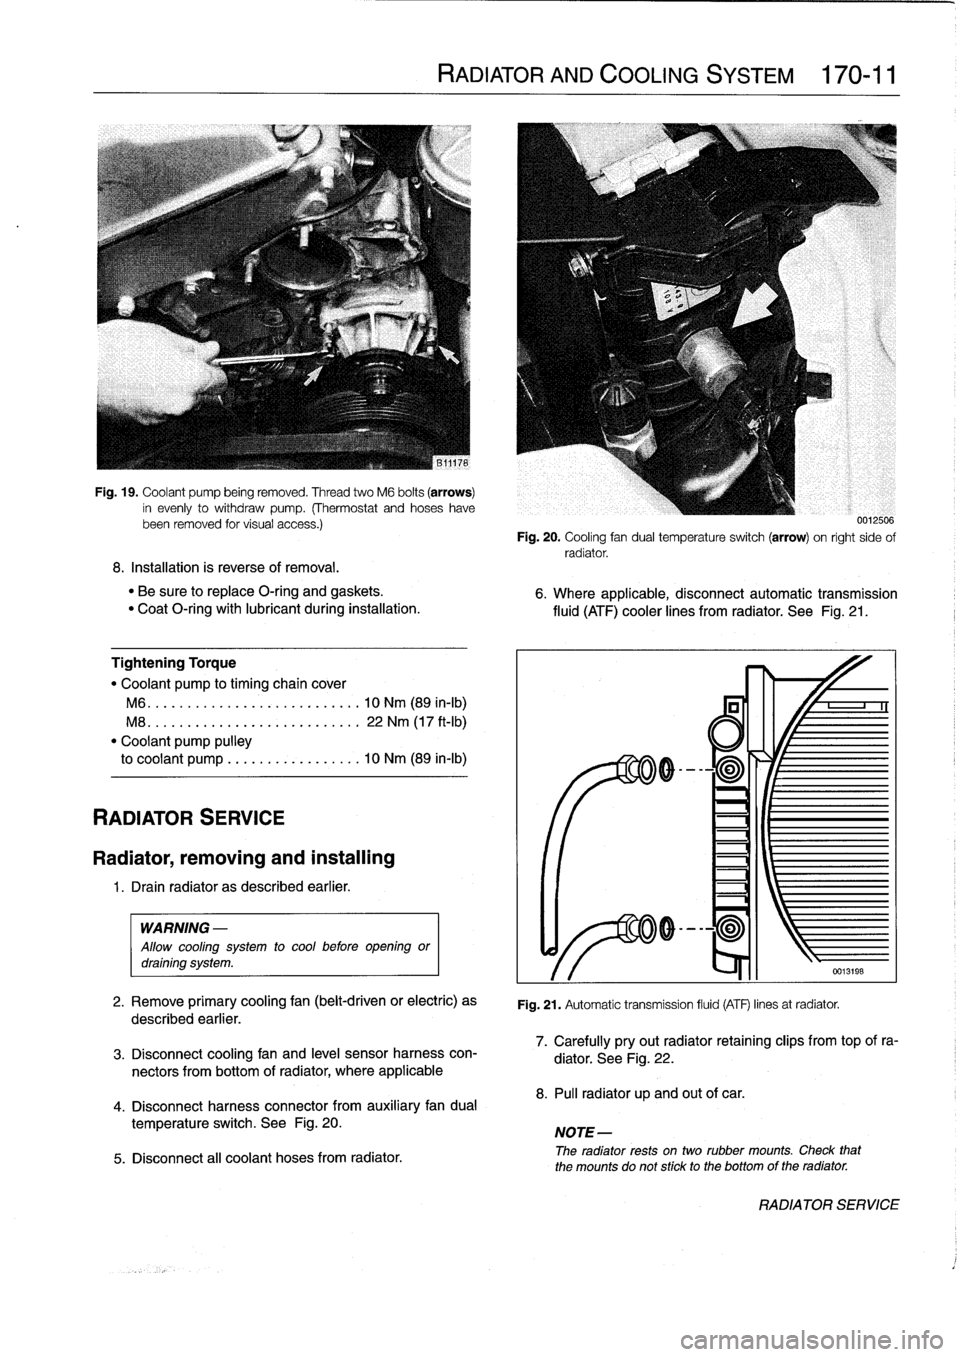 BMW M3 1996 E36 Workshop Manual 
Fig
.
19
.
Coolant
pump
being
removed
.
Thread
two
M6
bolts
(arrows)
in
evenly
to
withdraw
pump
.
(Thermostat
and
hoseshavebeen
removed
tor
visual
access
.)

8
.
Installation
is
reverse
of
removal
.
